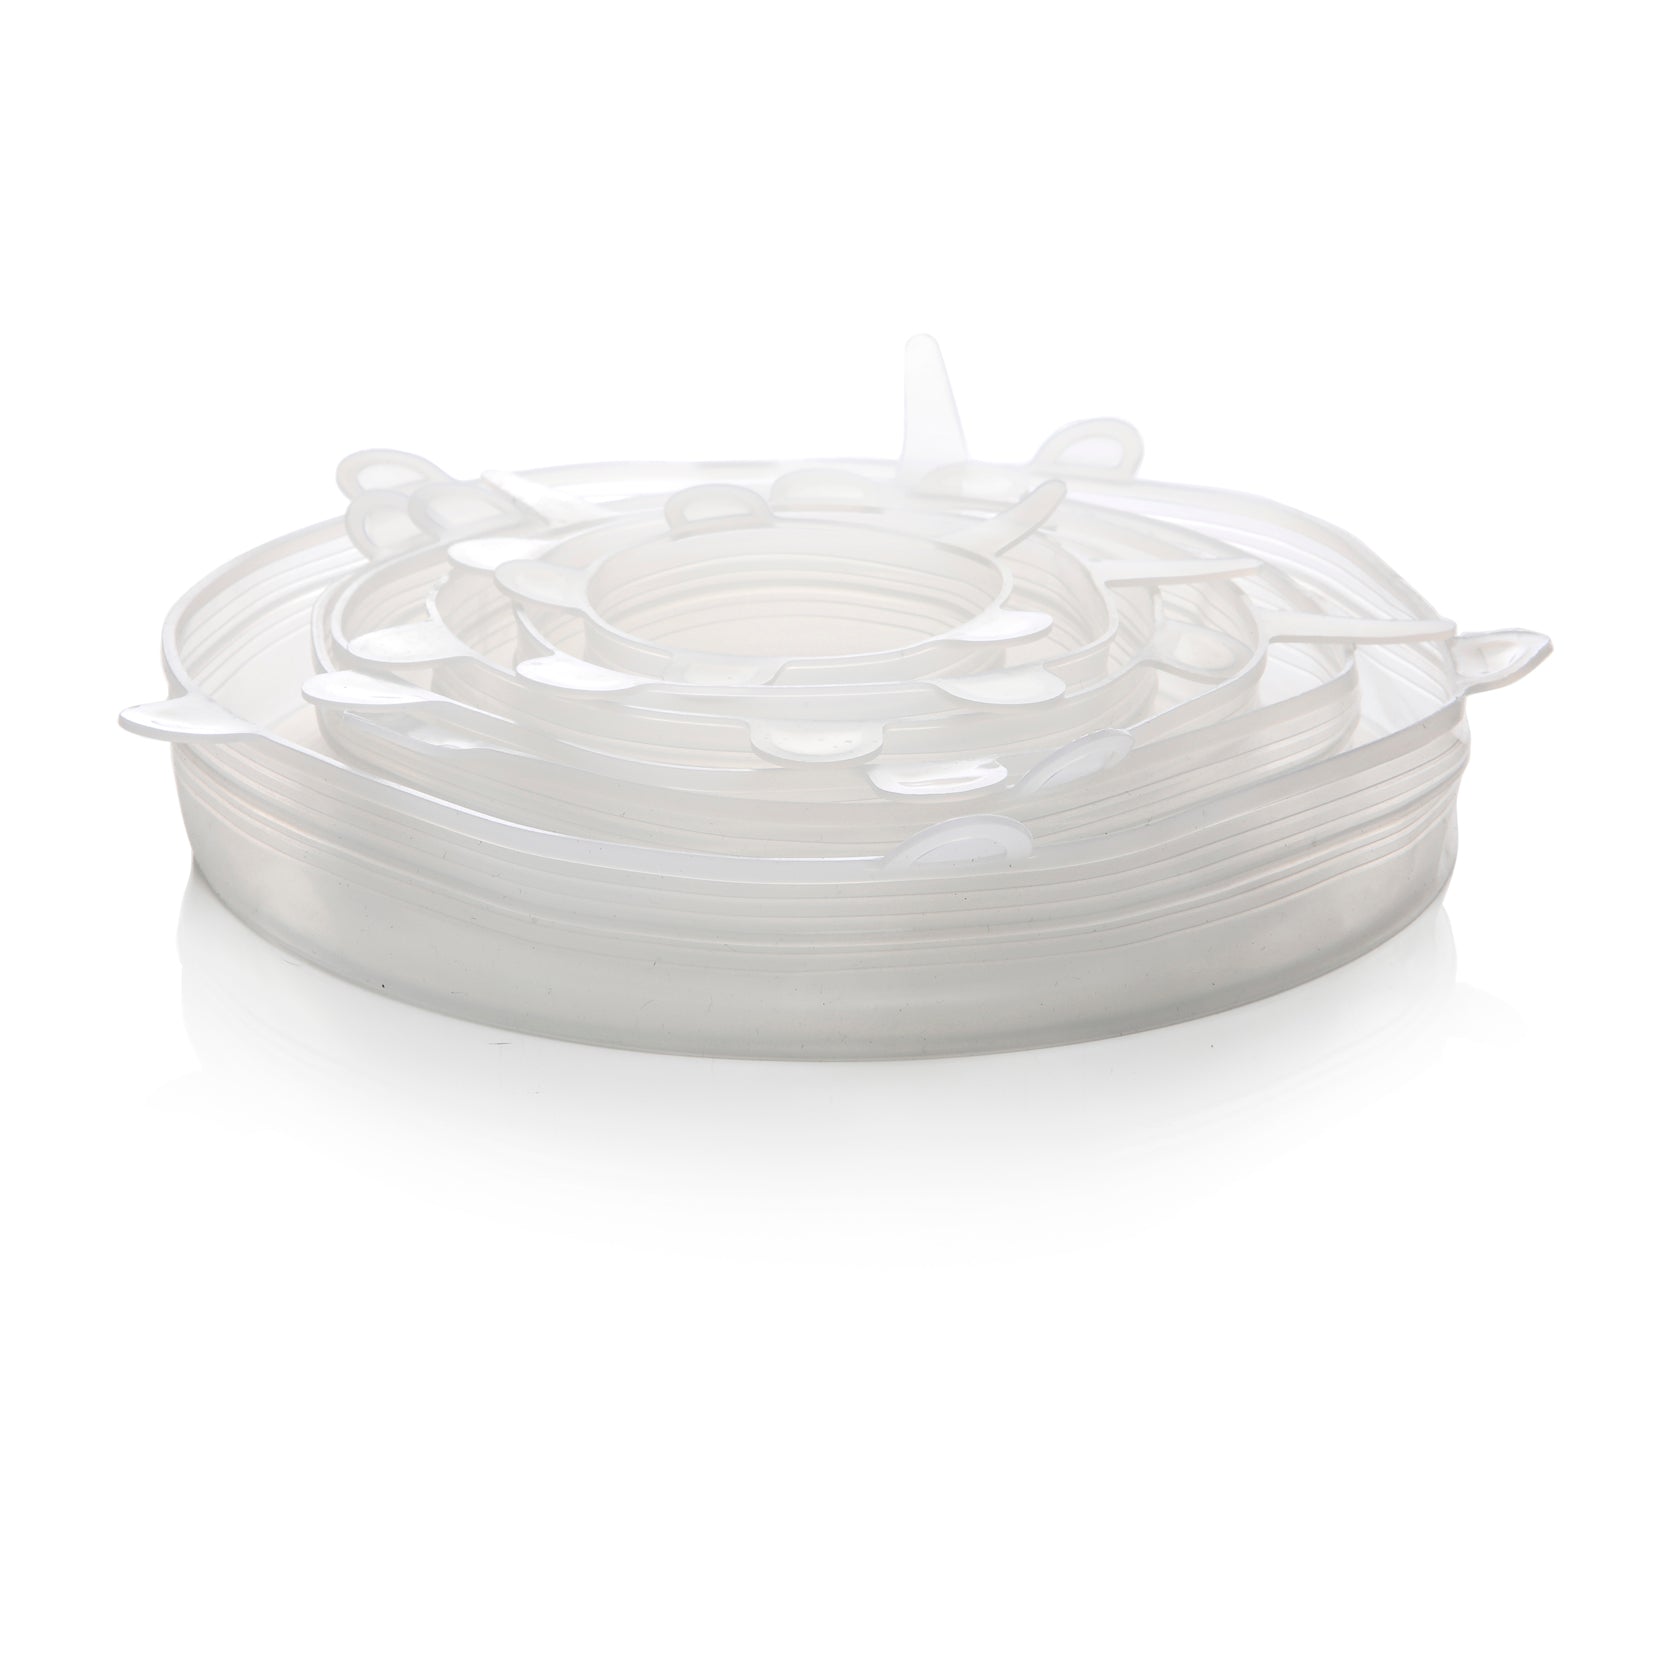 Reusable Silicone Lids — Set of 6